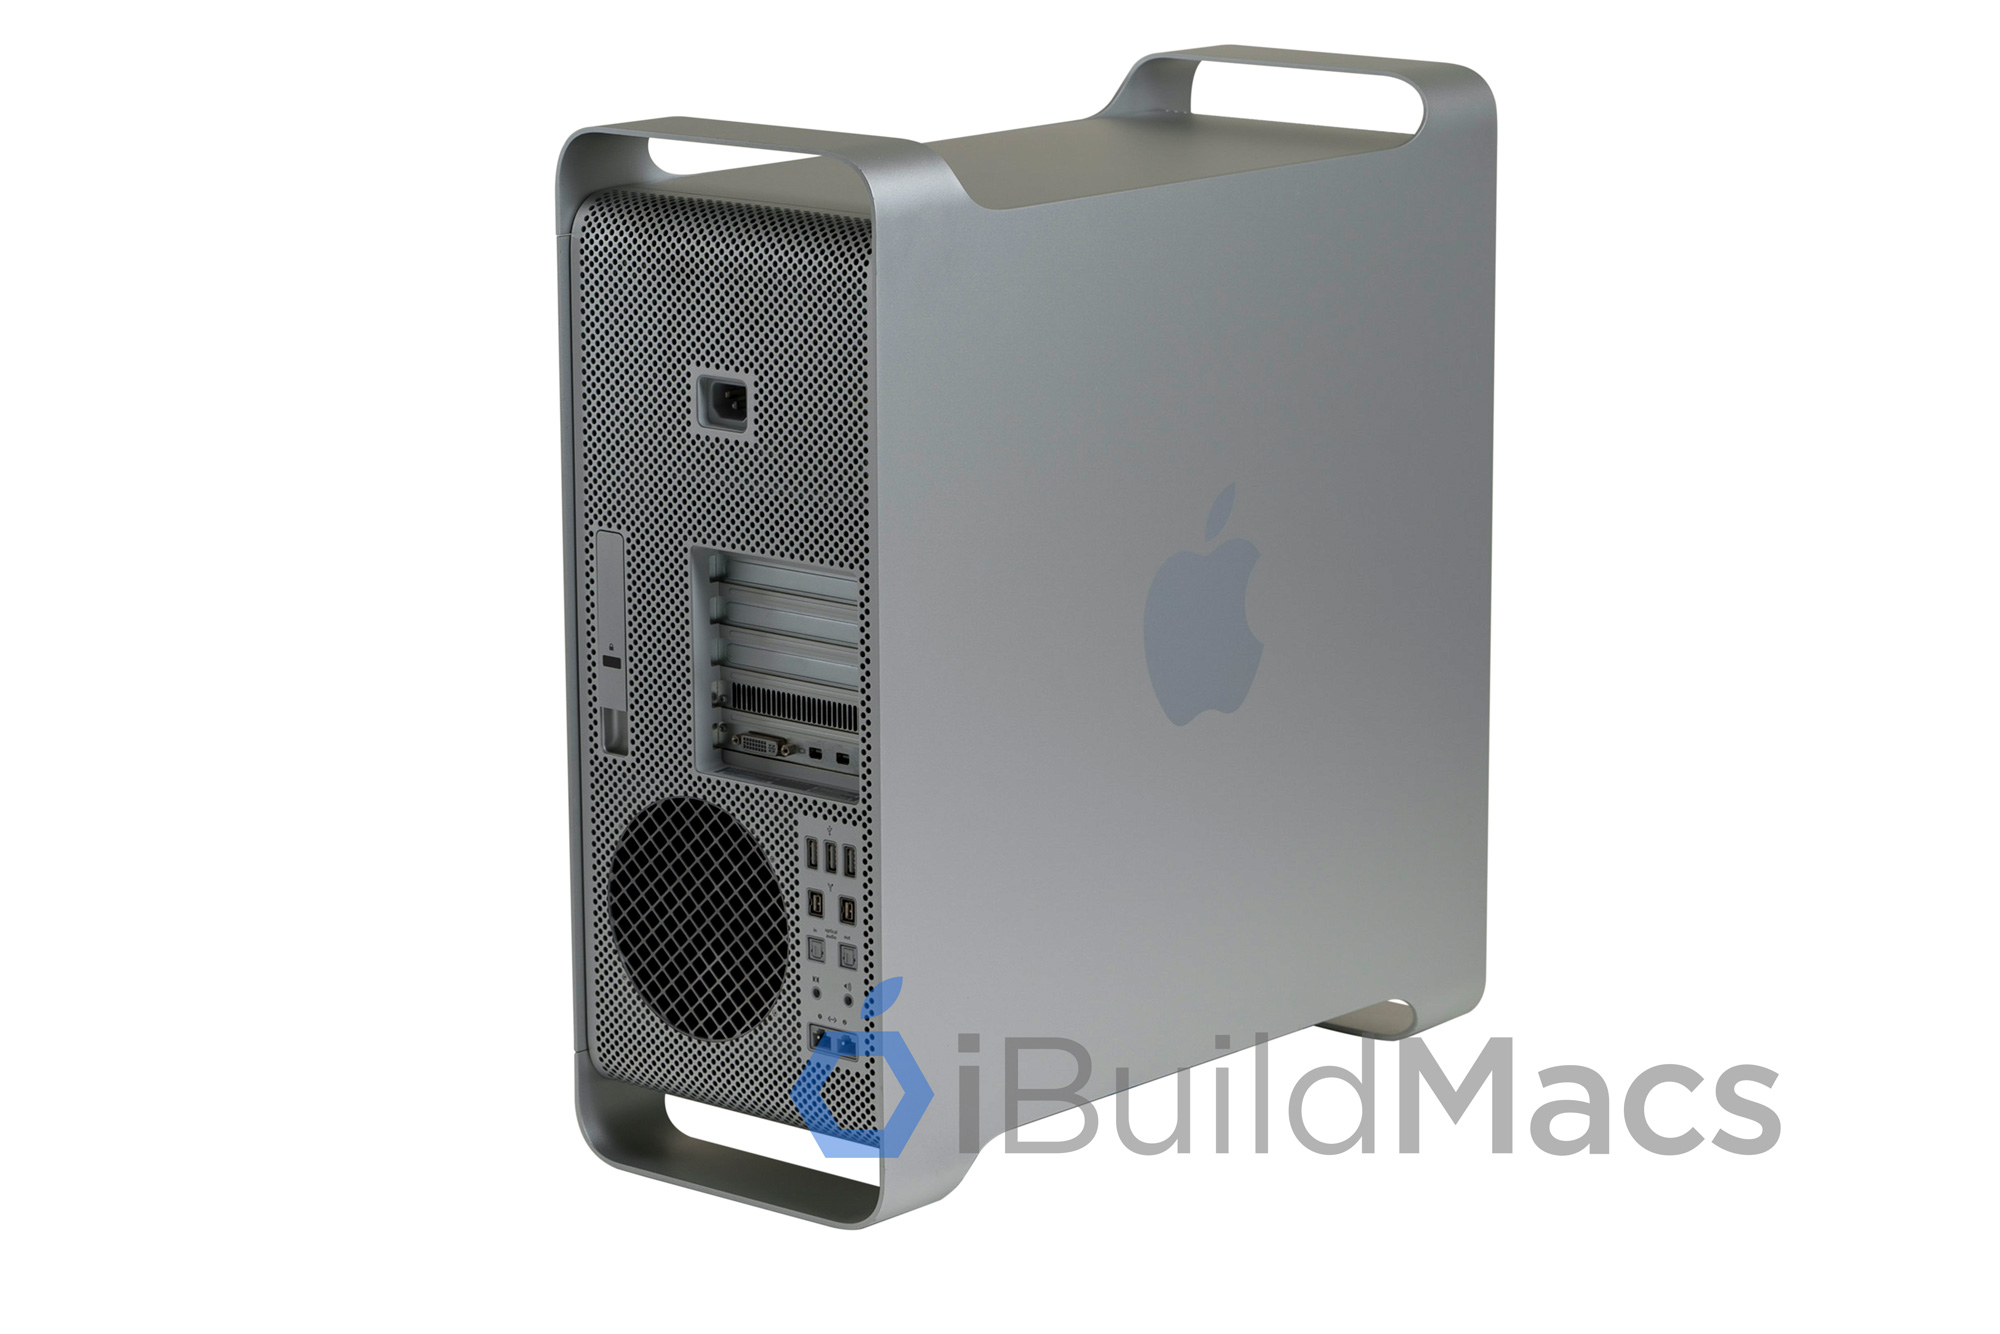 build a 2010 mac pro for video editing